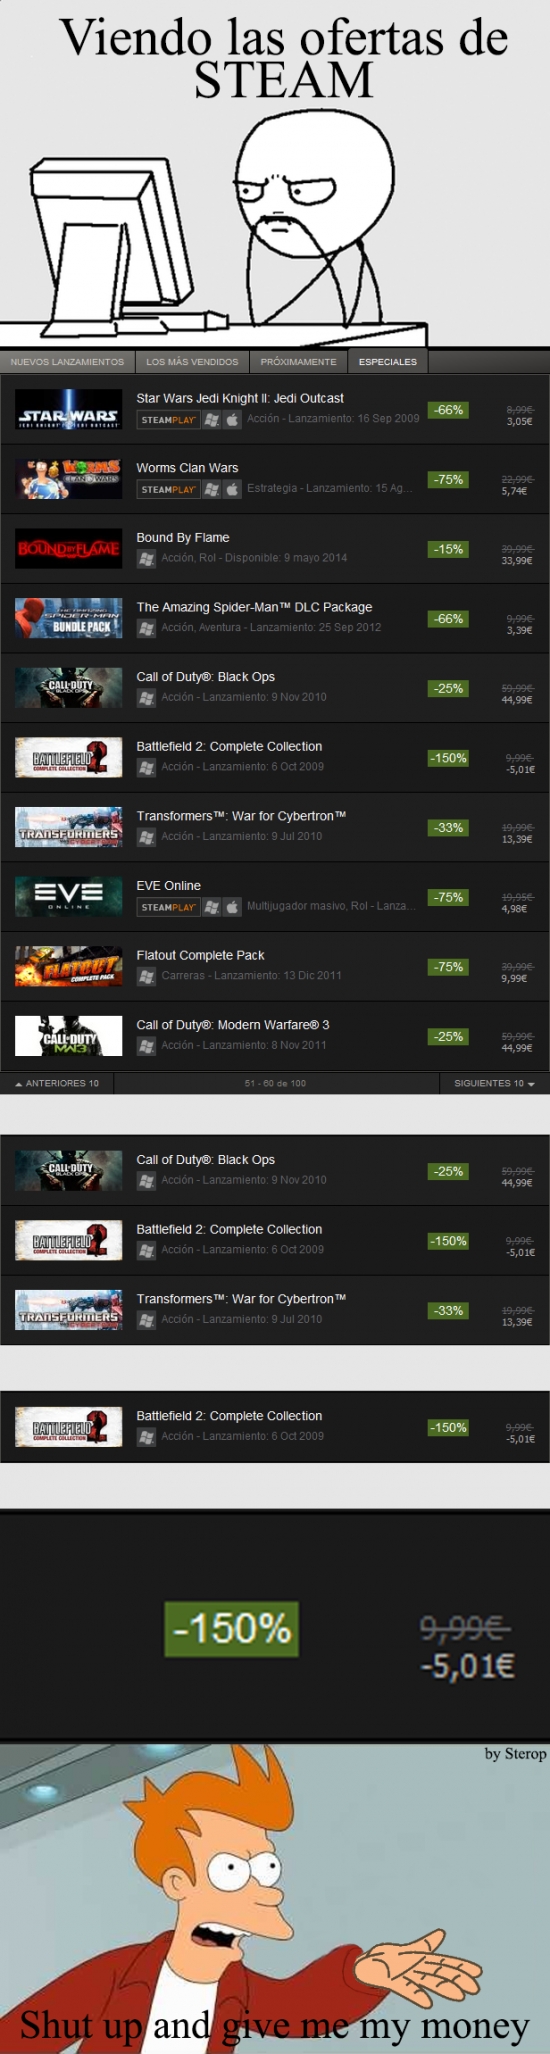 -150%,descuento,fry,shut up and give me my money,Shut up and take my money,steam,te pagan ellos si te lo bajas